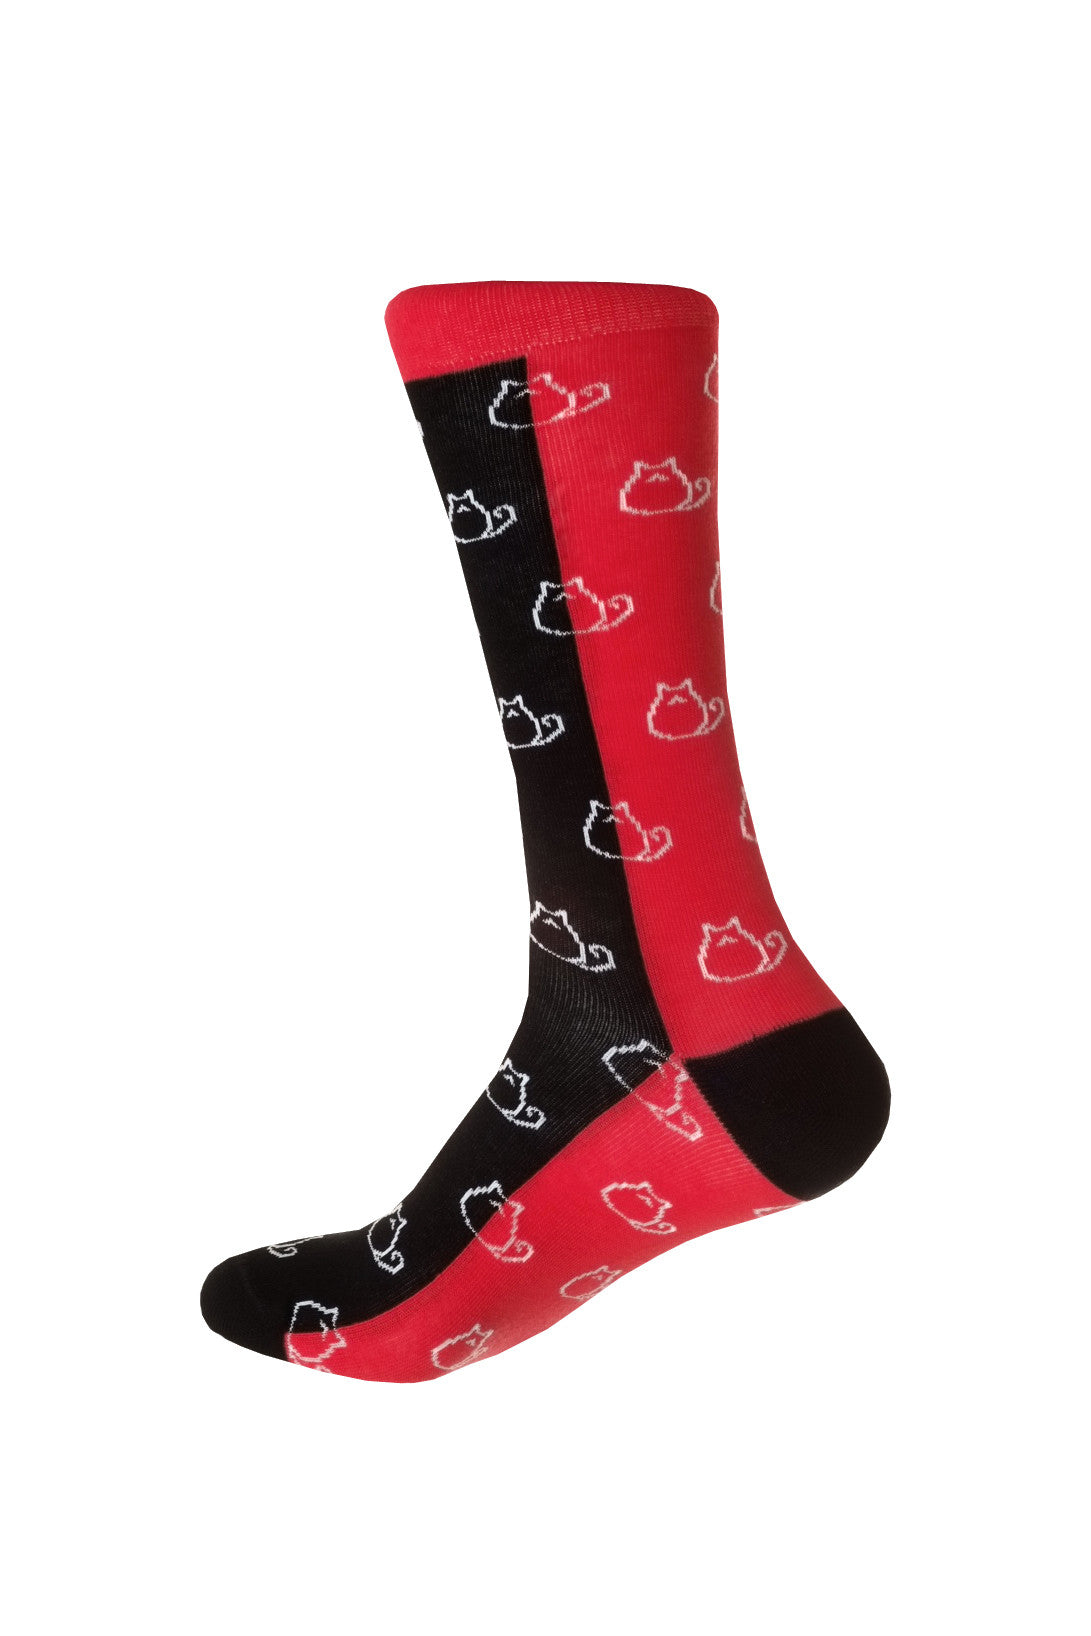 Giraffe Cool | Black Red and White Cats Brushed Cotton Socks Foot Back